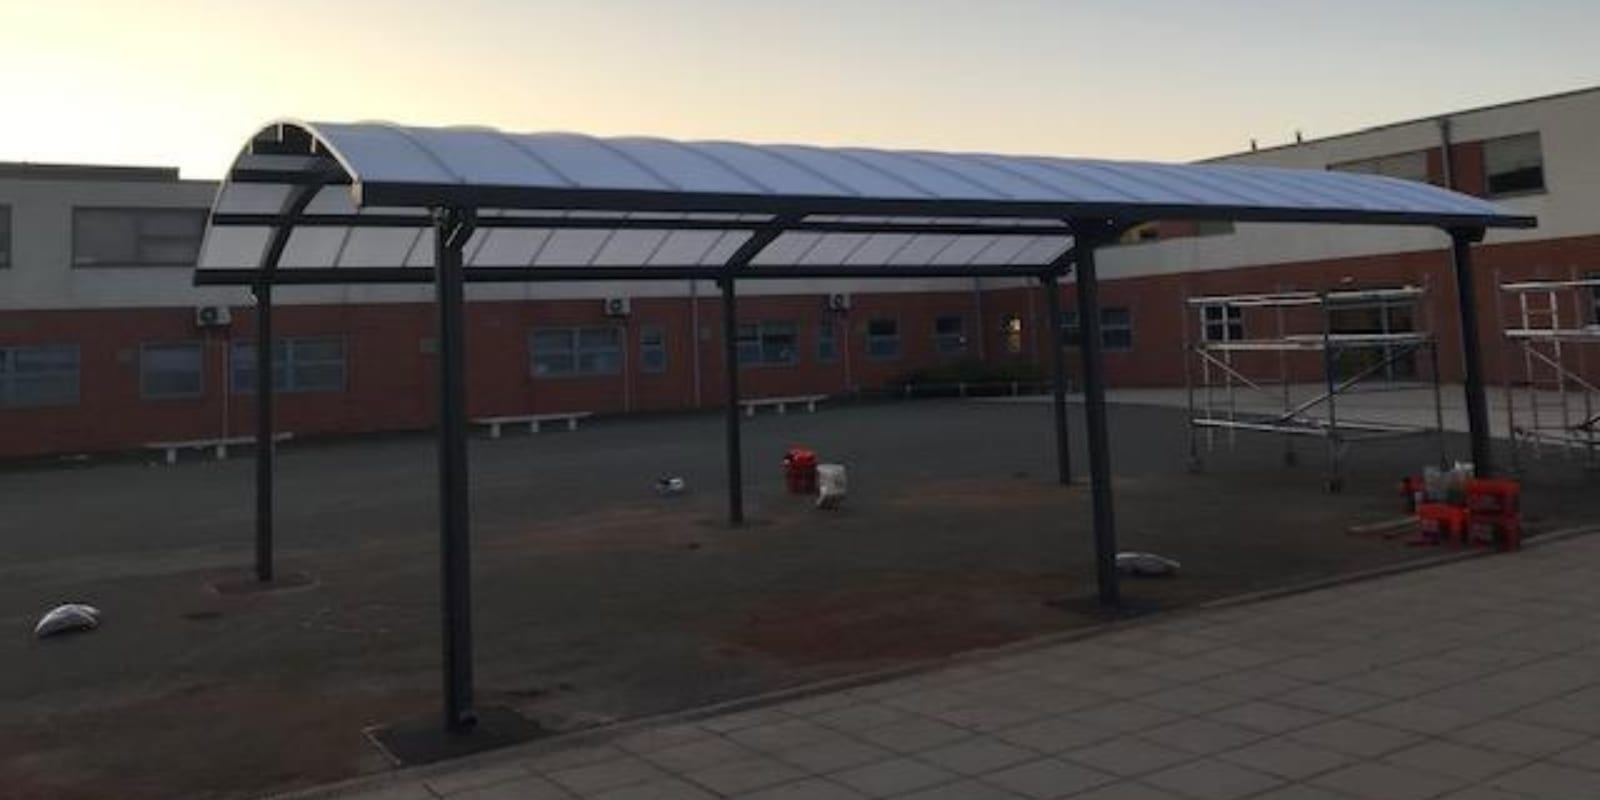 Curved roof shelter we made for Outwood Academy Valley